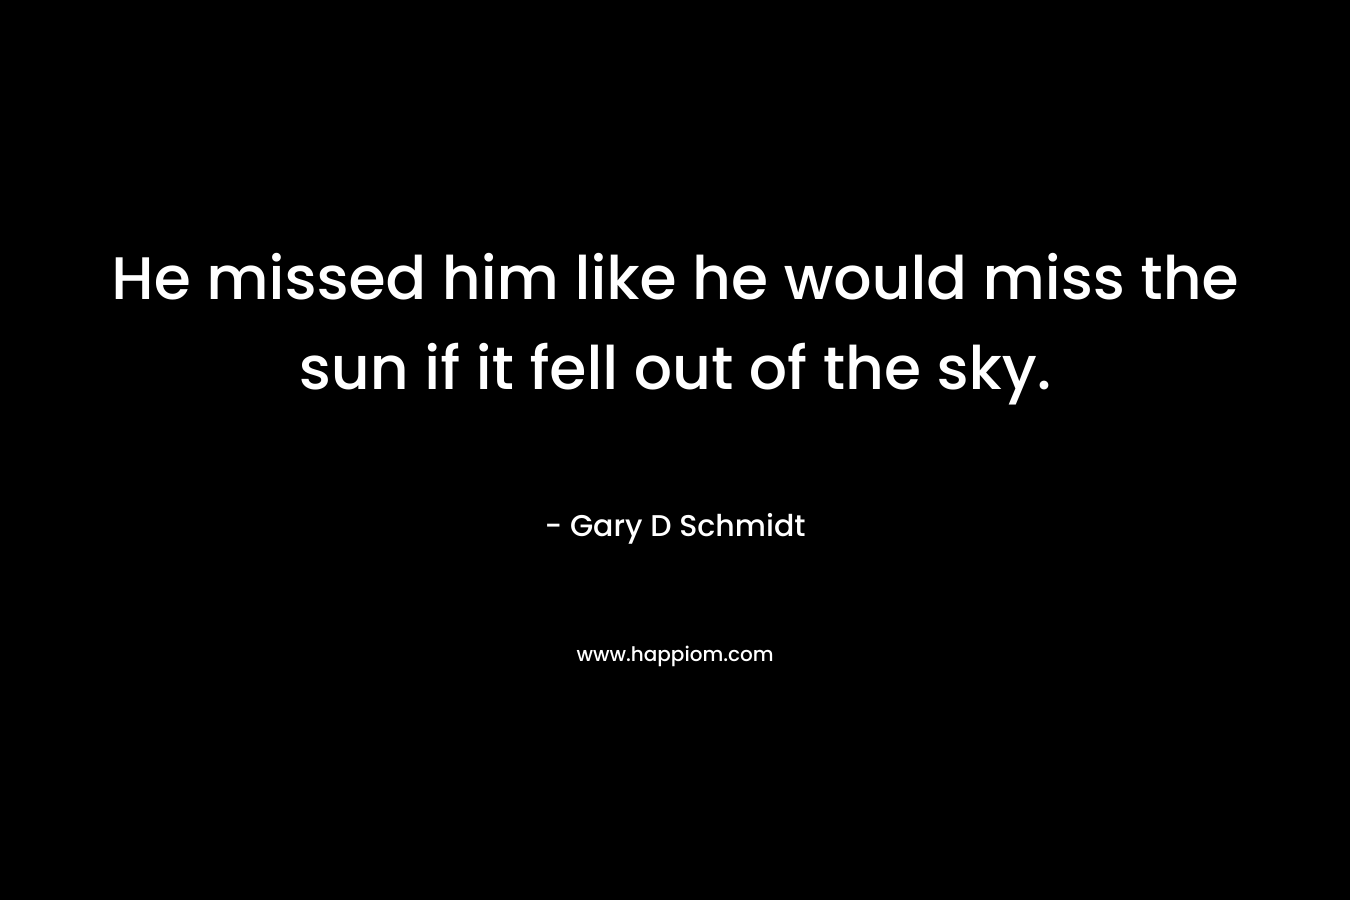 He missed him like he would miss the sun if it fell out of the sky. – Gary D Schmidt